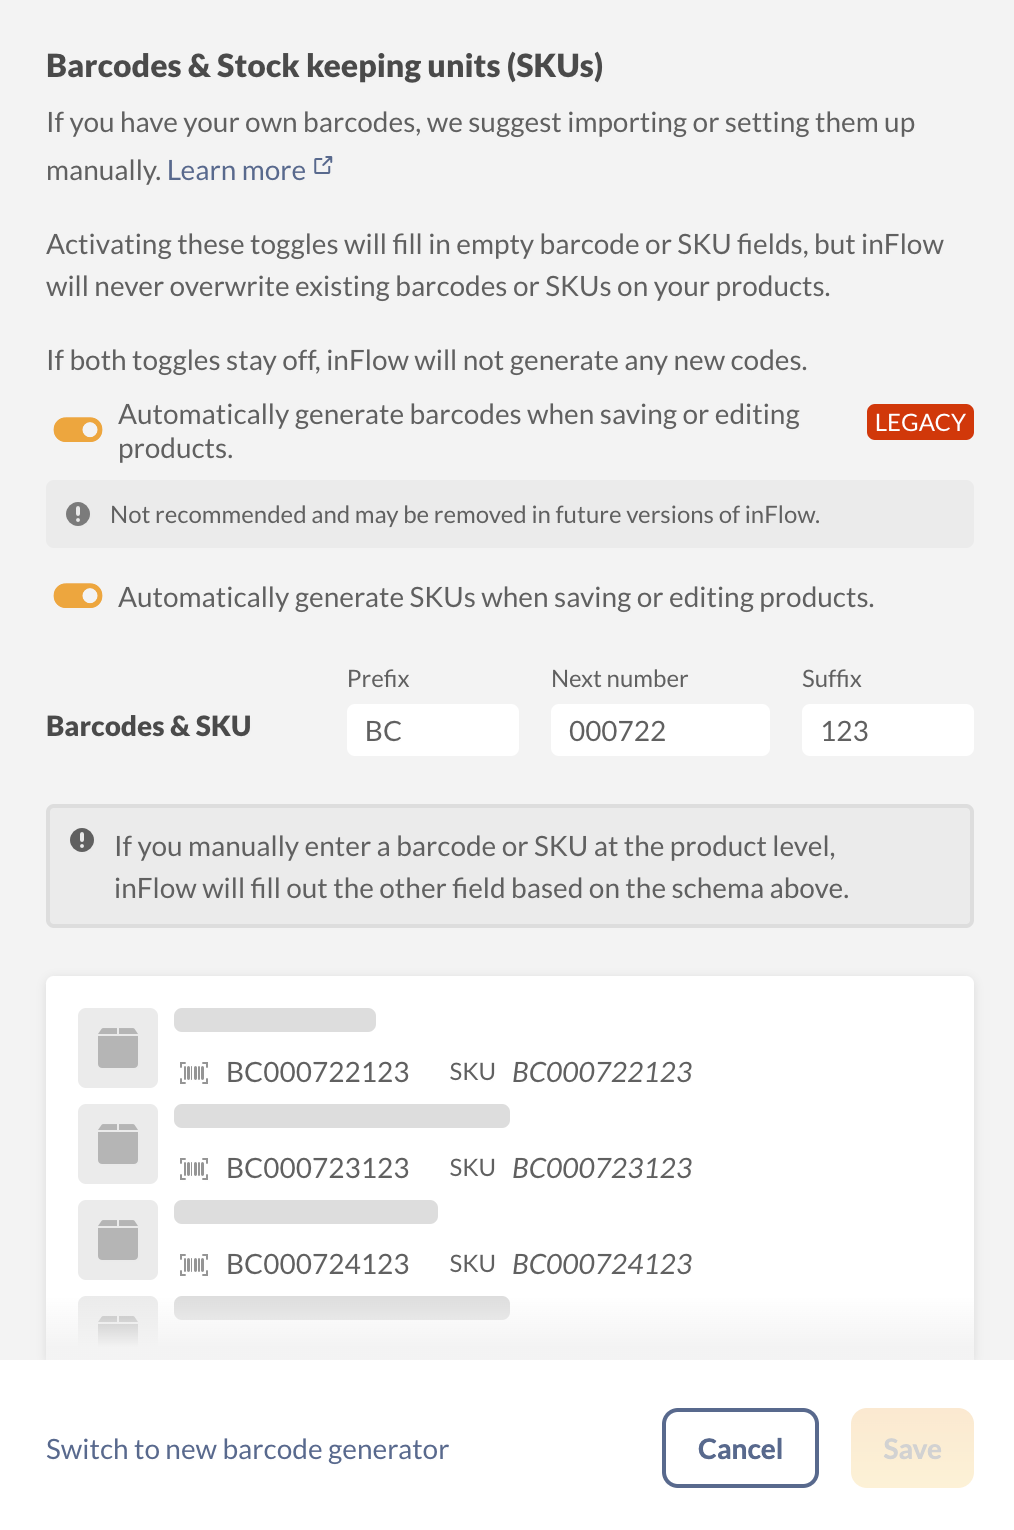 inFlow's legacy barcode and SKU generator.